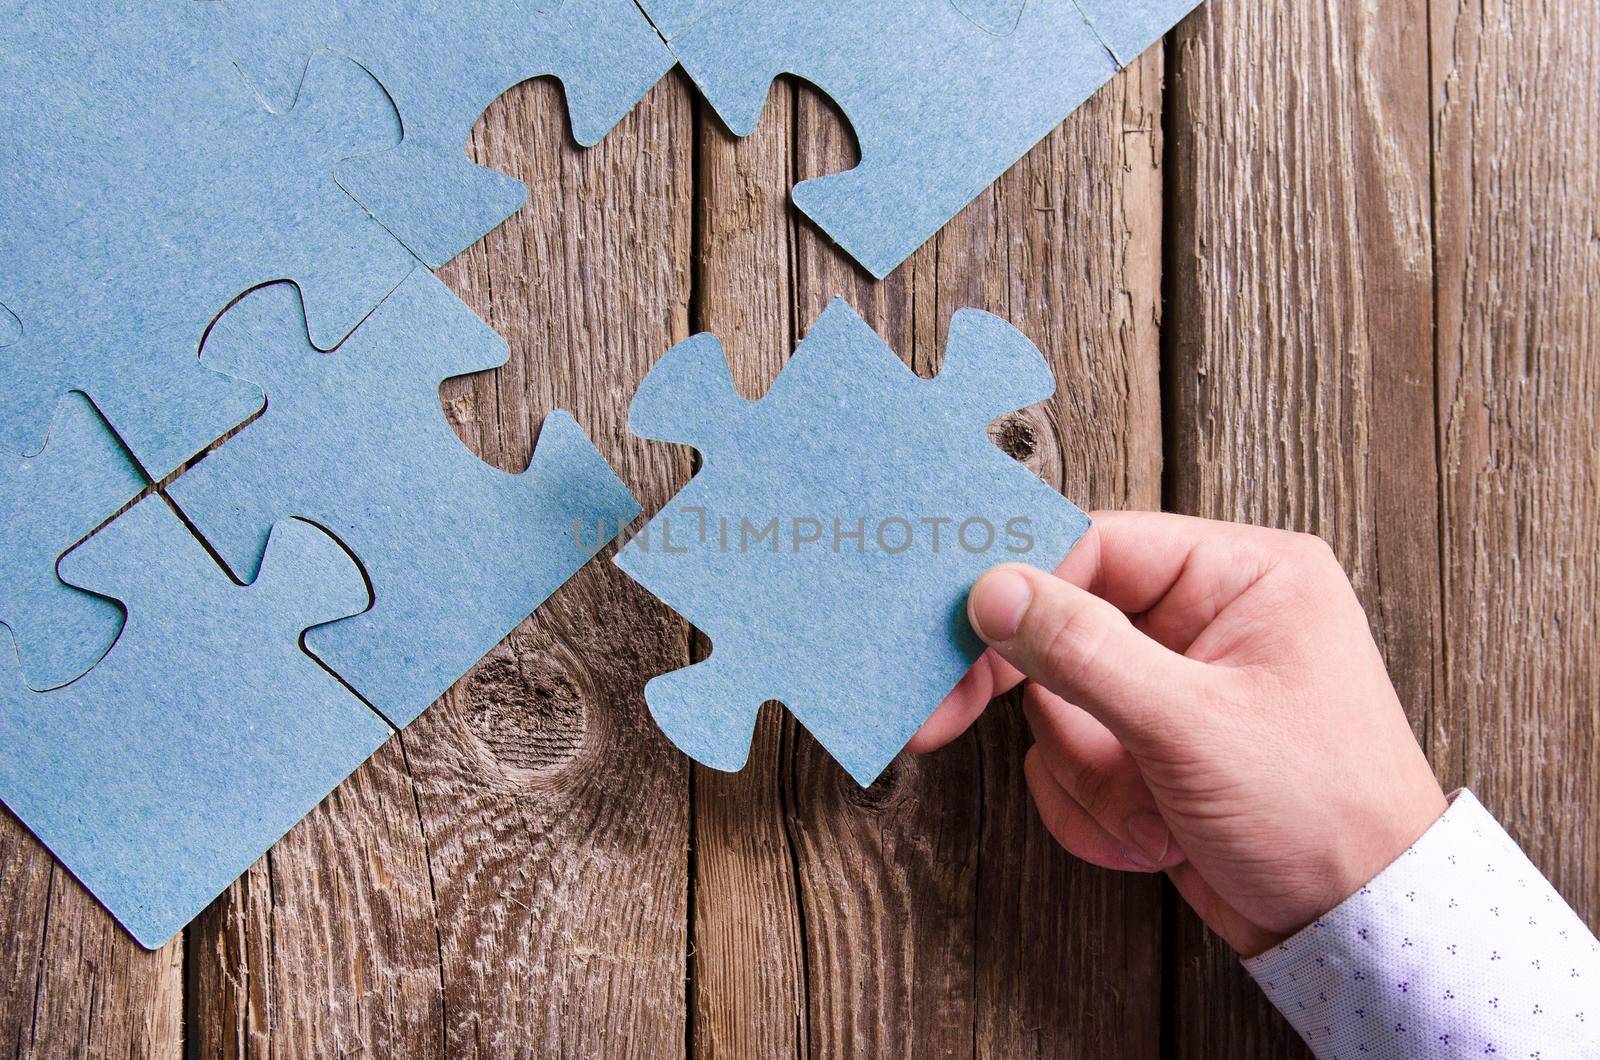 Incomplete puzzles lying on wooden rustic boards. Conceptual of innovation, solution finding and integration. Hand with puzzle piece